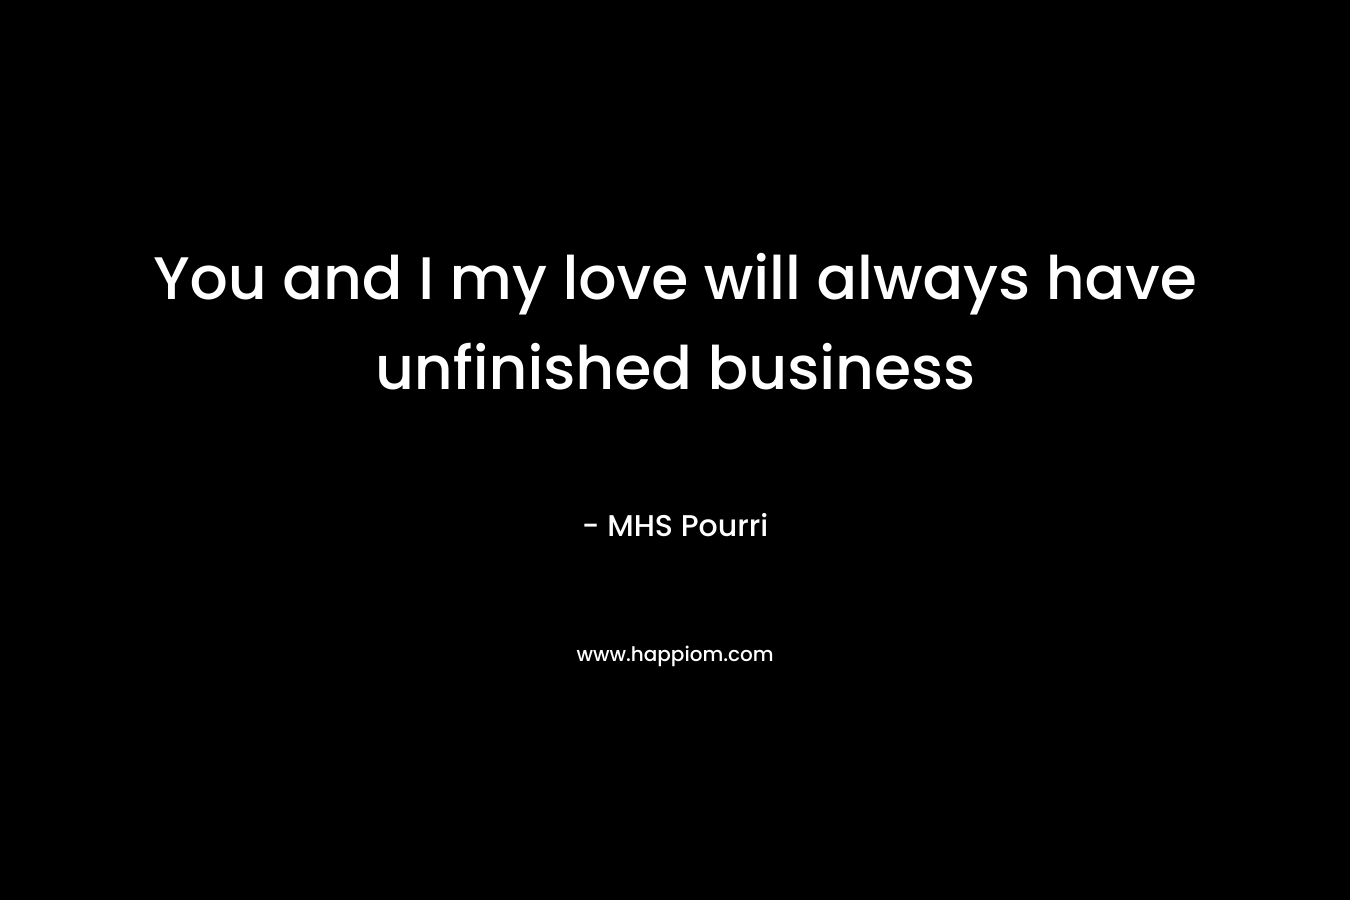 You and I my love will always have unfinished business – MHS Pourri